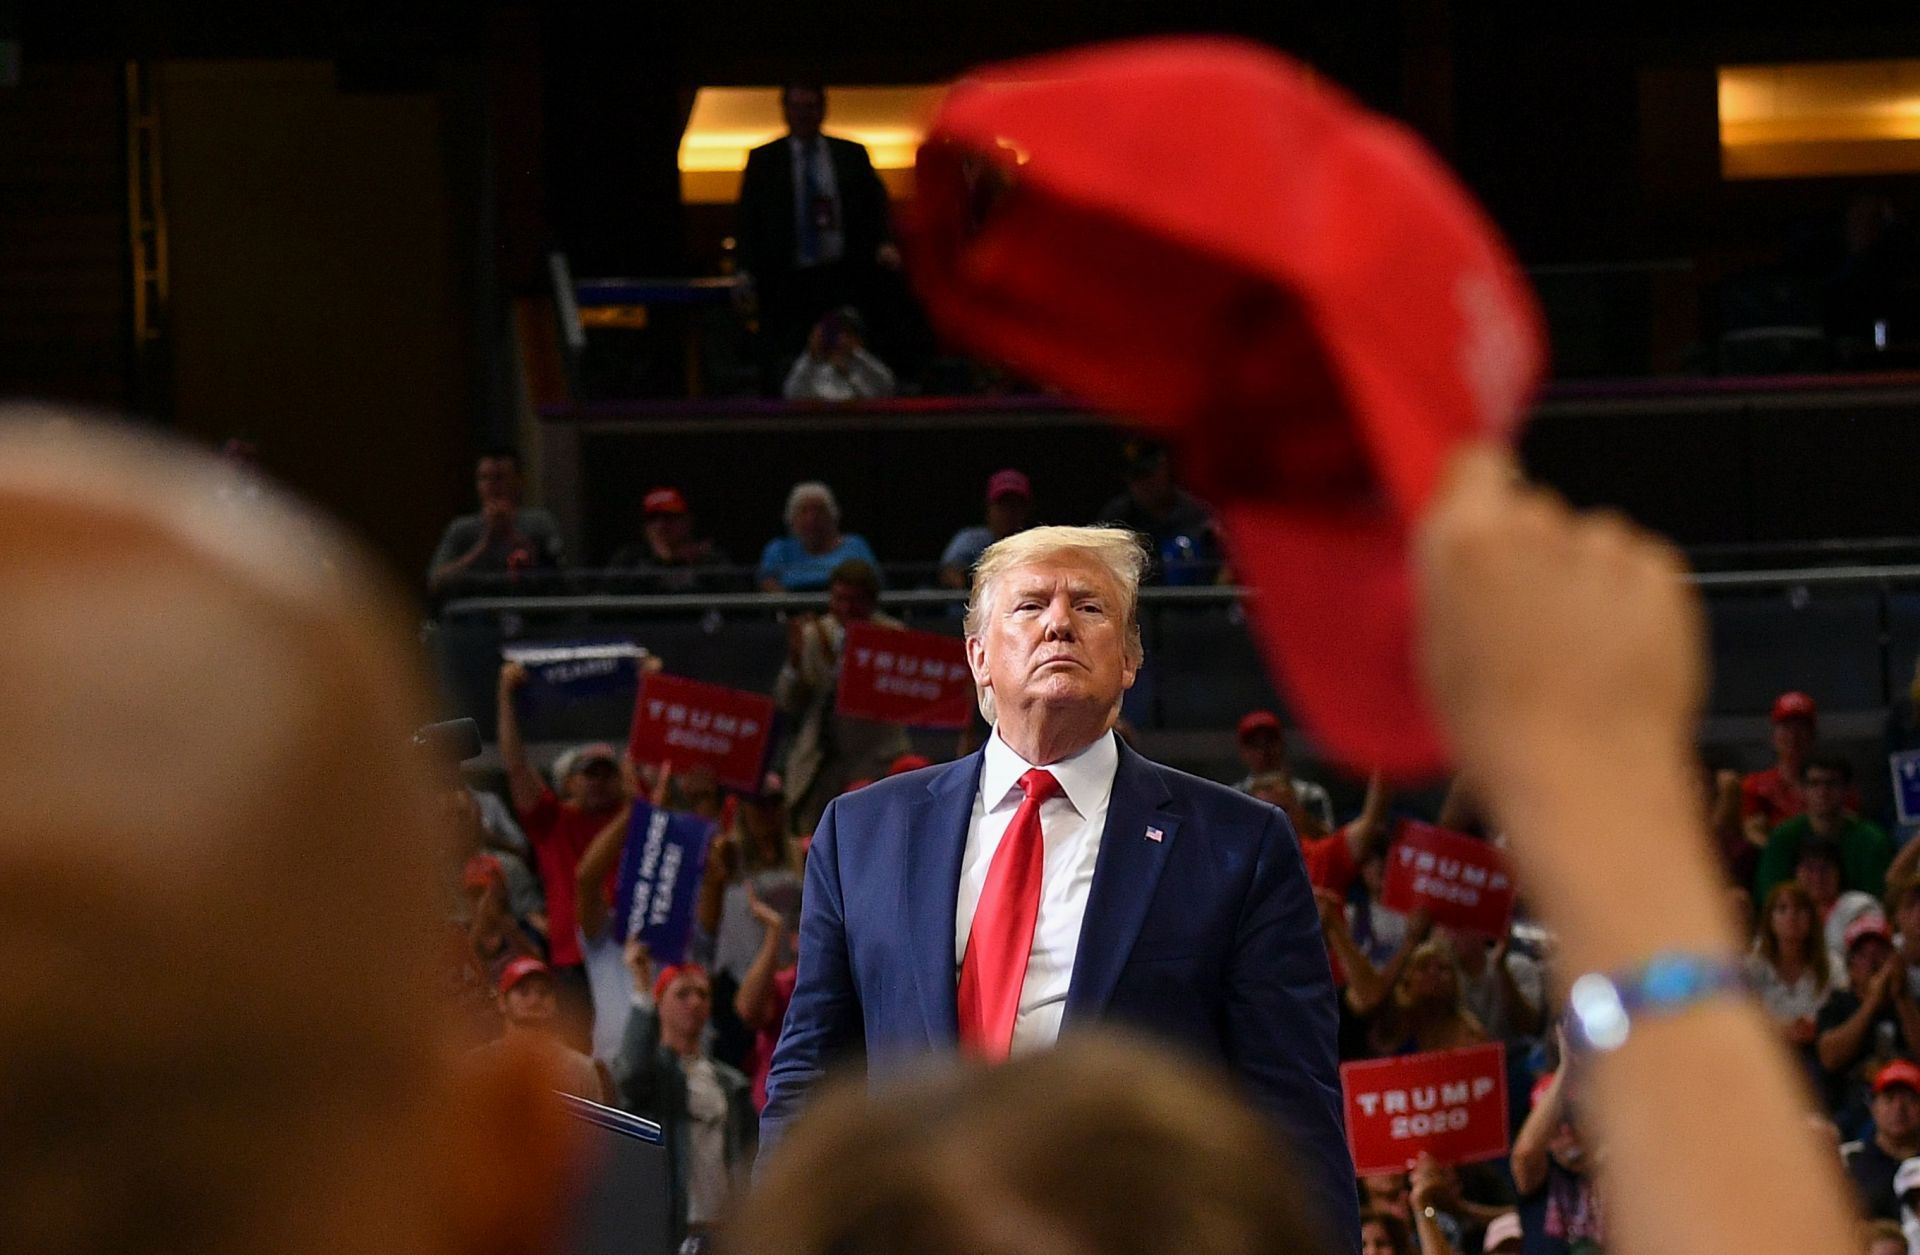 U.S. President Donald Trump officially launches his 2020 reelection campaign with a rally in Orlando, Florida, on June 18, 2019.